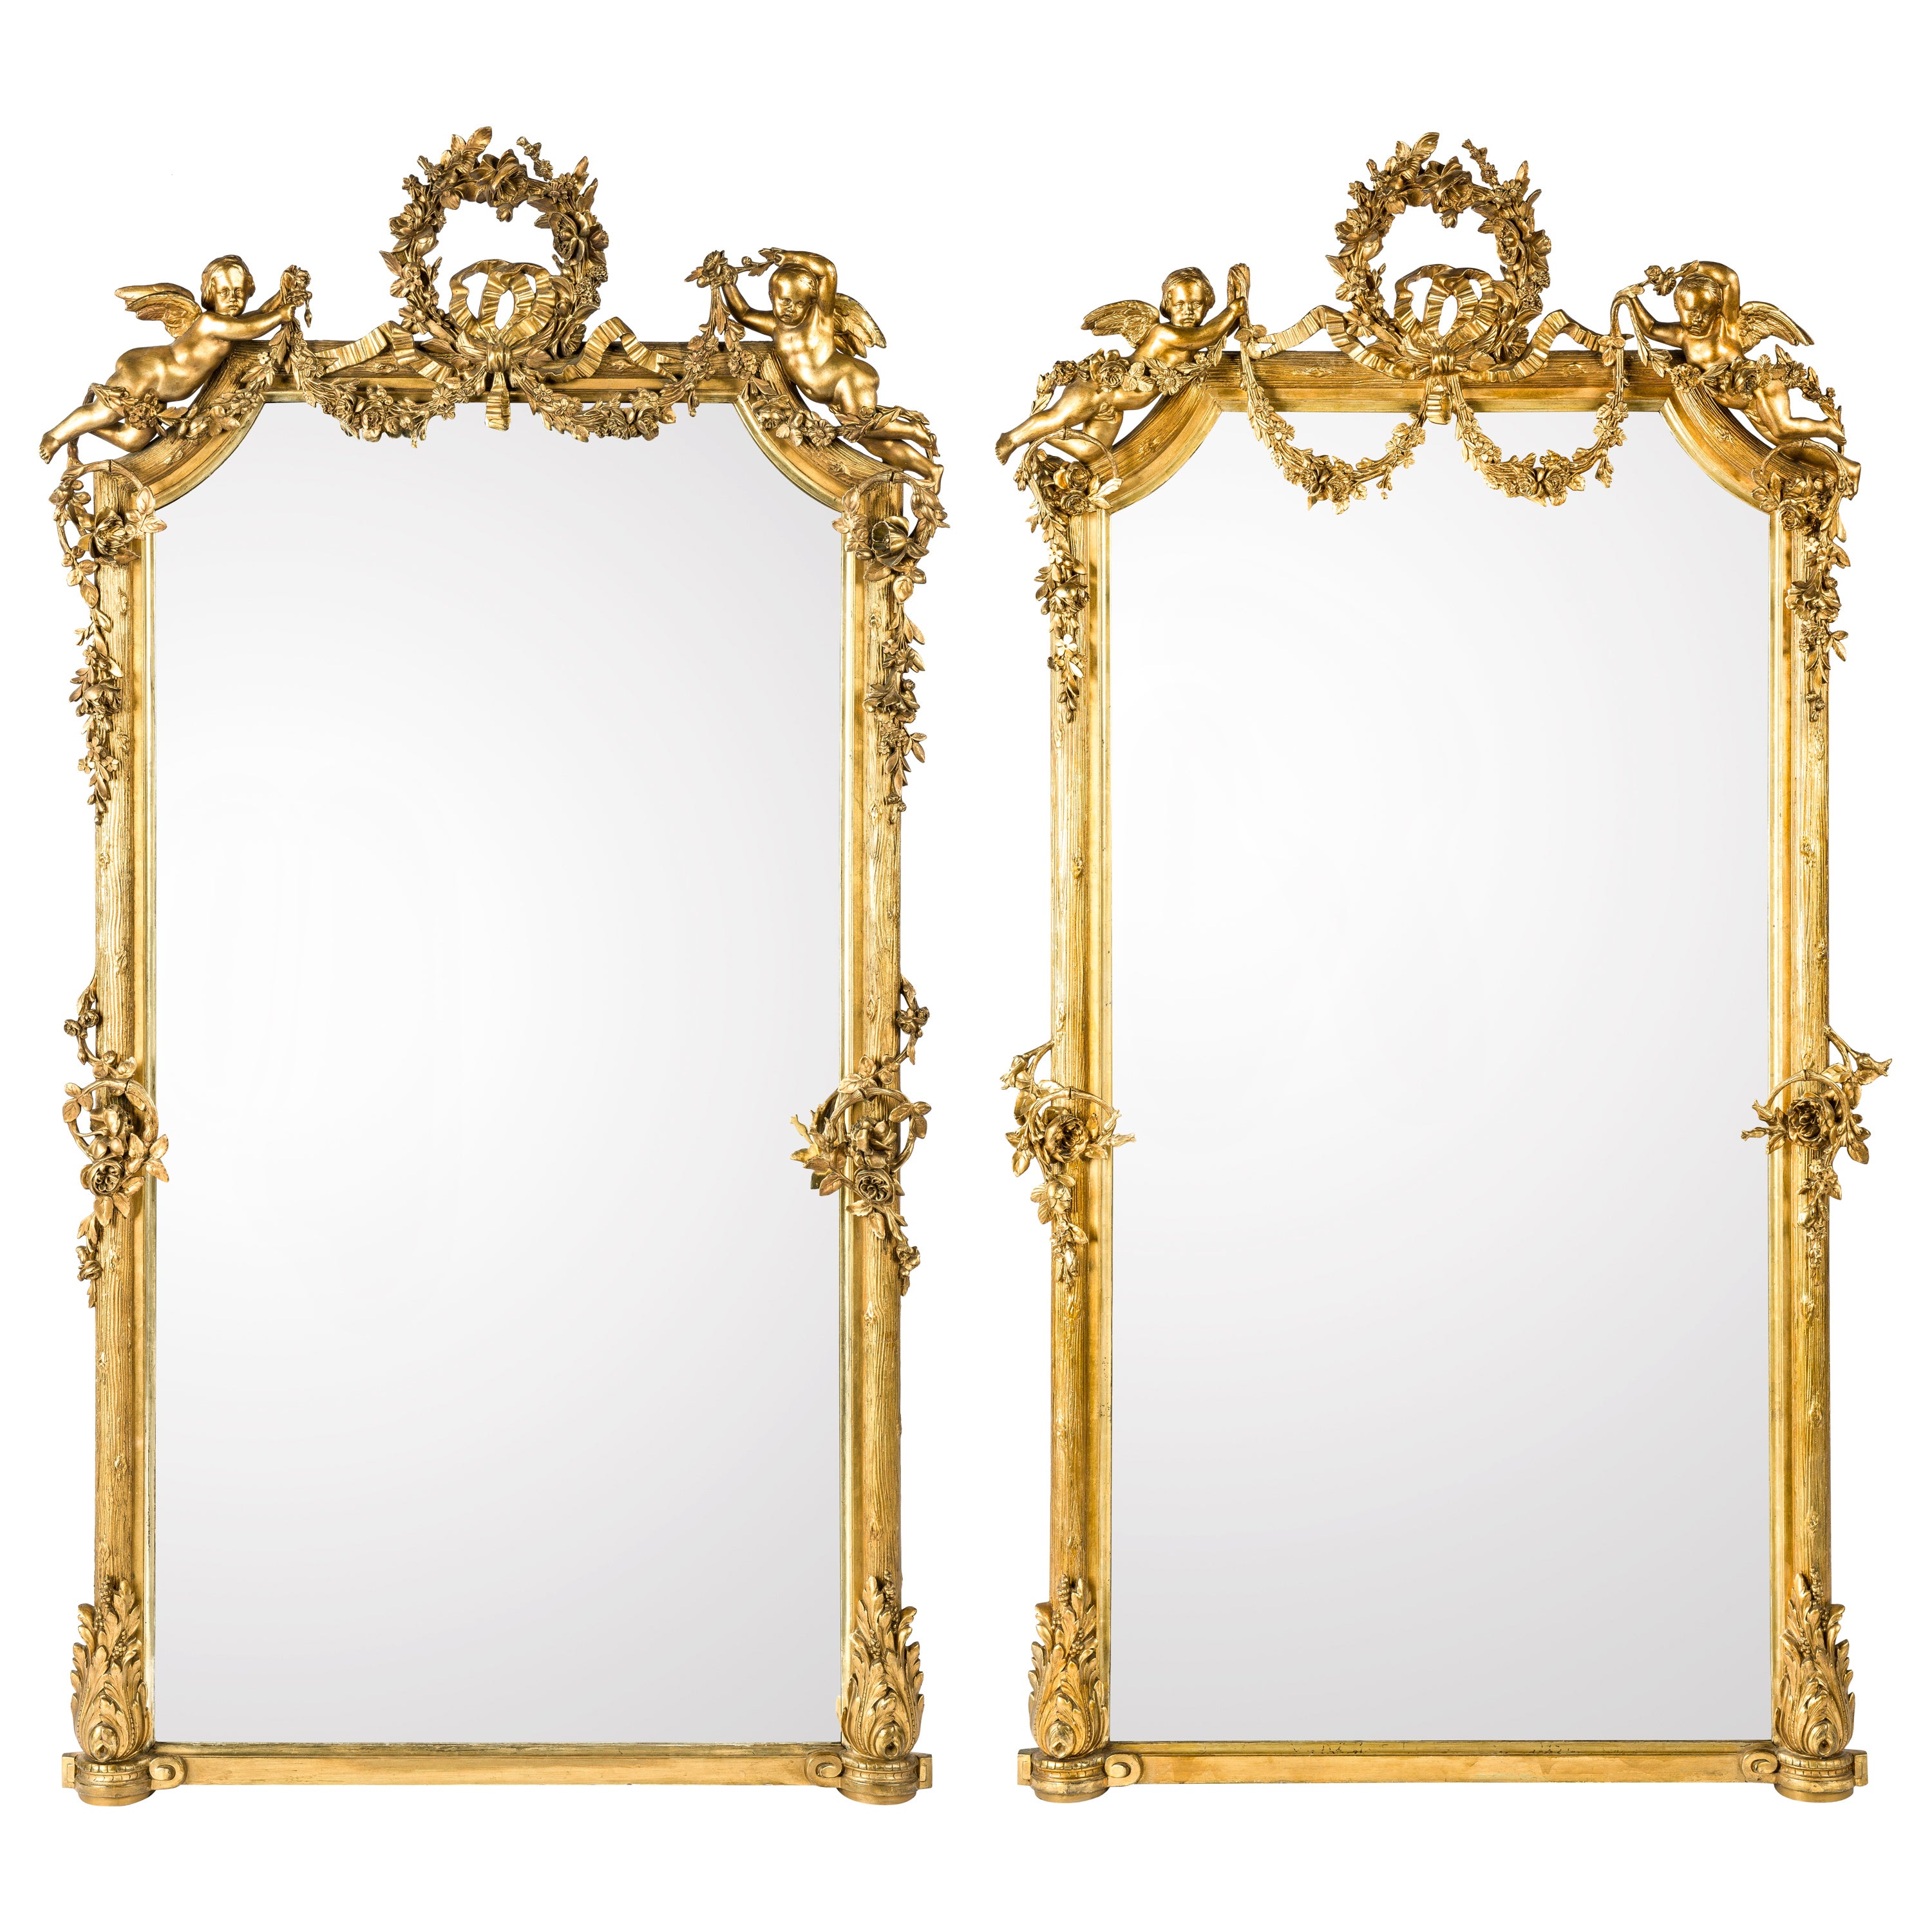 Monumental Pair of Large-Scale Antique French Gilt Golden Mirrors